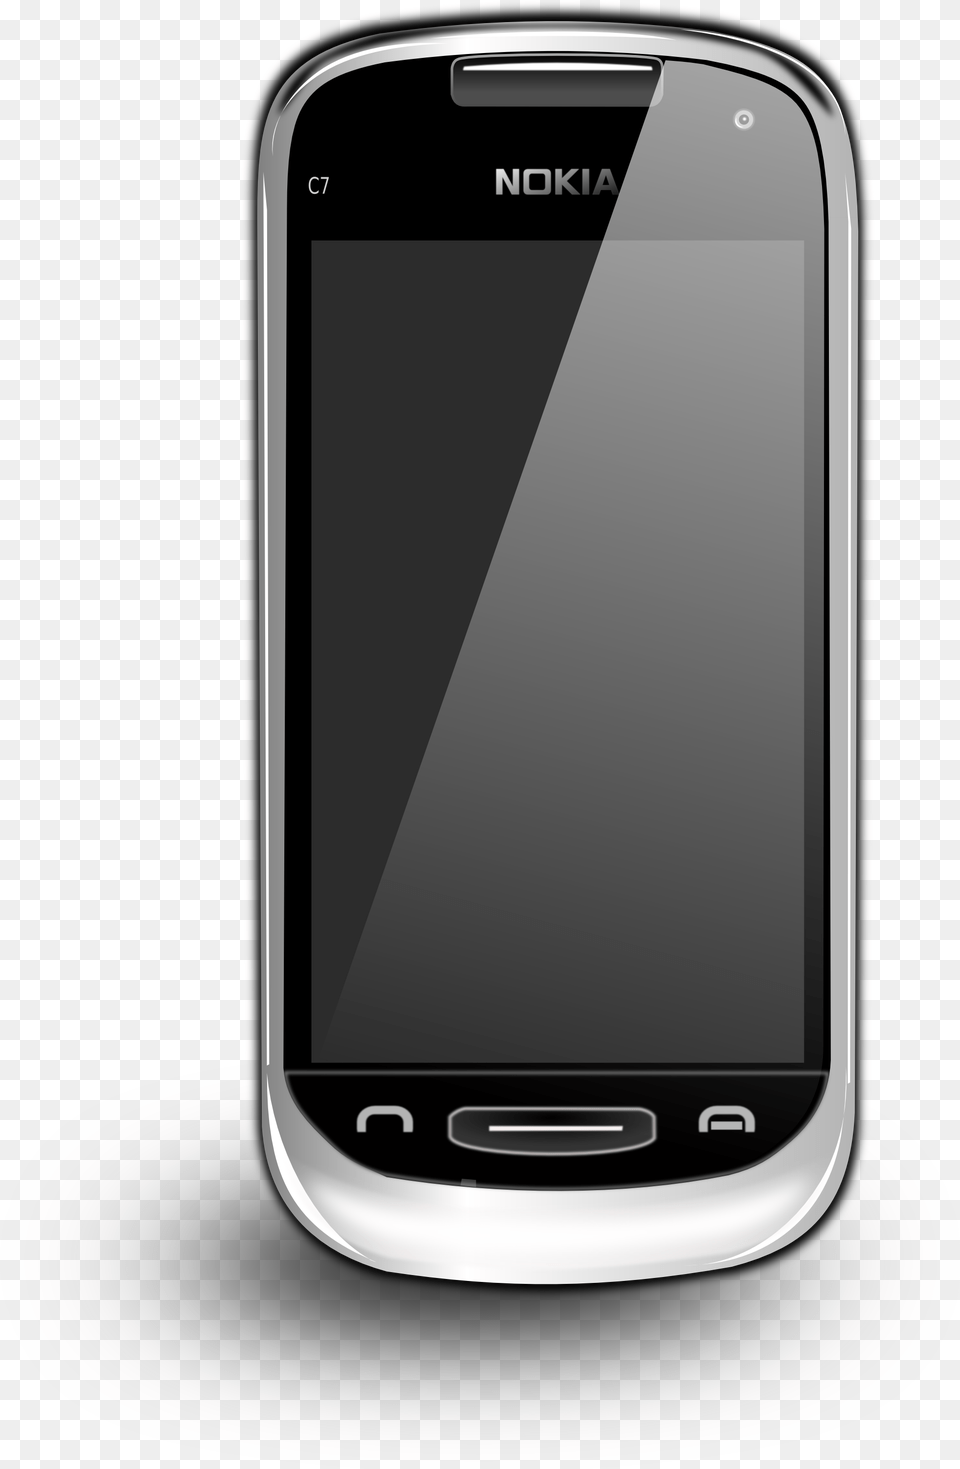 Cell Phone Clip Art Nokia C7, Electronics, Mobile Phone Free Png Download